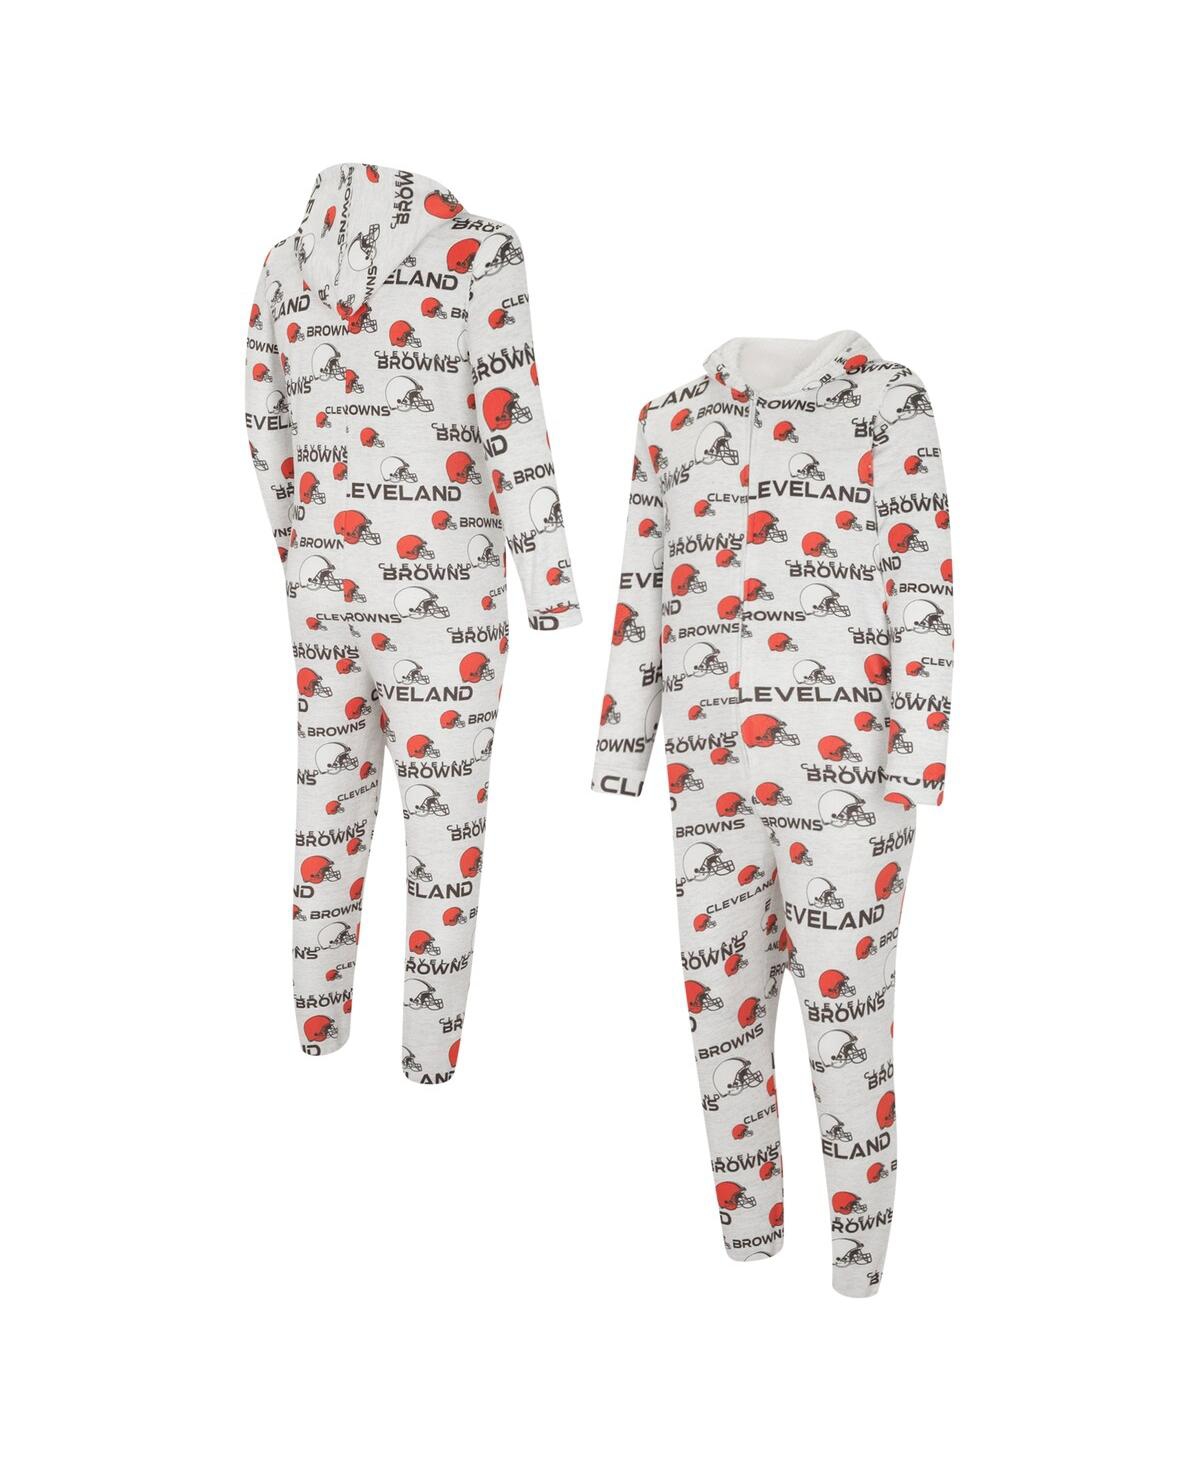 CONCEPTS SPORT MEN'S CONCEPTS SPORT WHITE CLEVELAND BROWNS ALLOVER PRINT DOCKET UNION FULL-ZIP HOODED PAJAMA SUIT